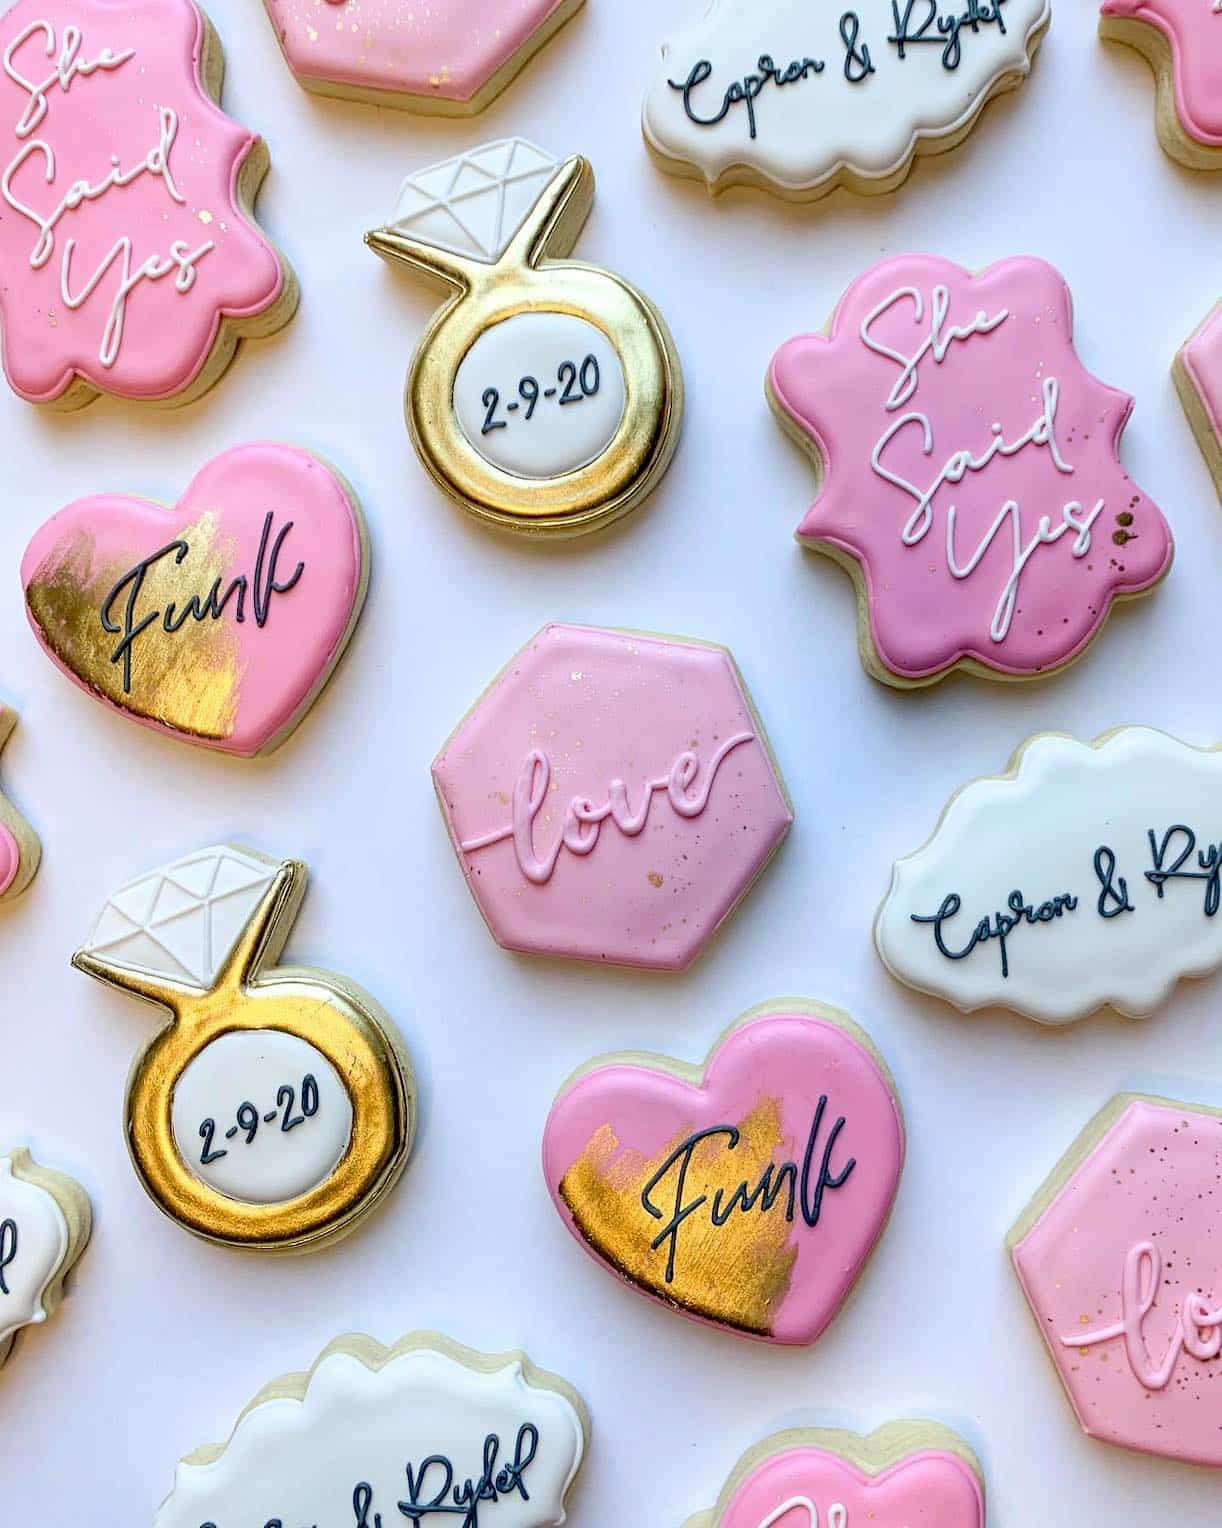 Useful Wedding Favor Ideas | Personalized Wedding Cookies | Hill City Bride